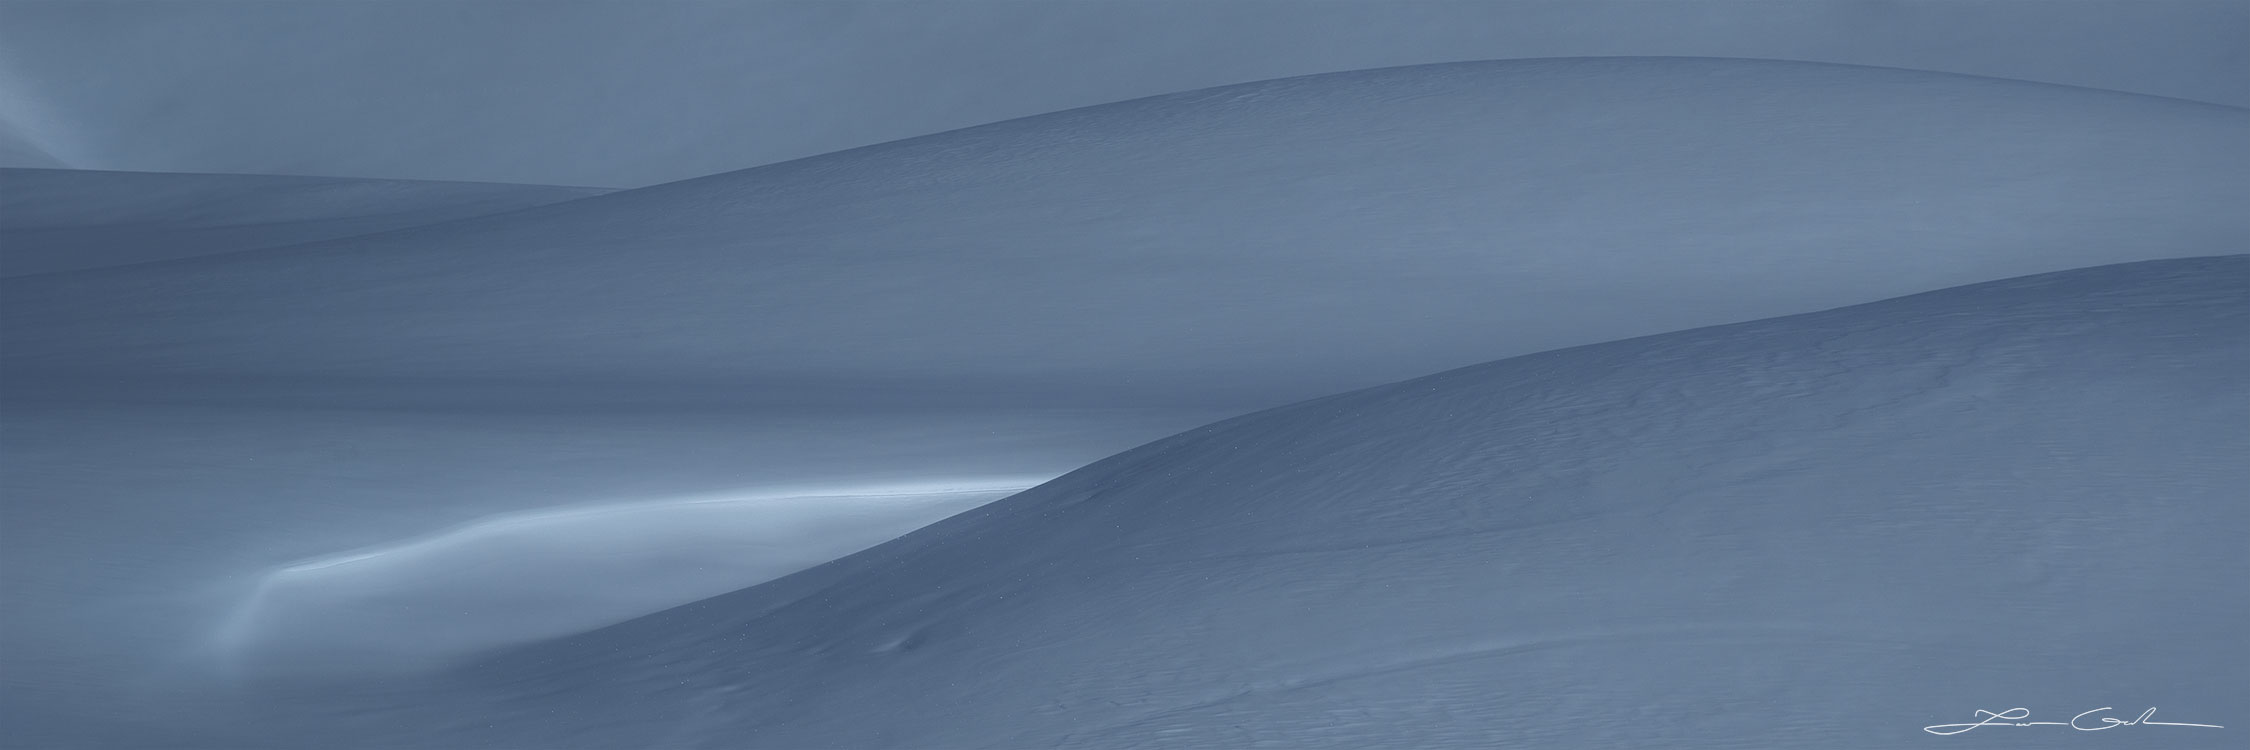 Abstract snow art with dunes-like looking forms - Gintchin Fine Art